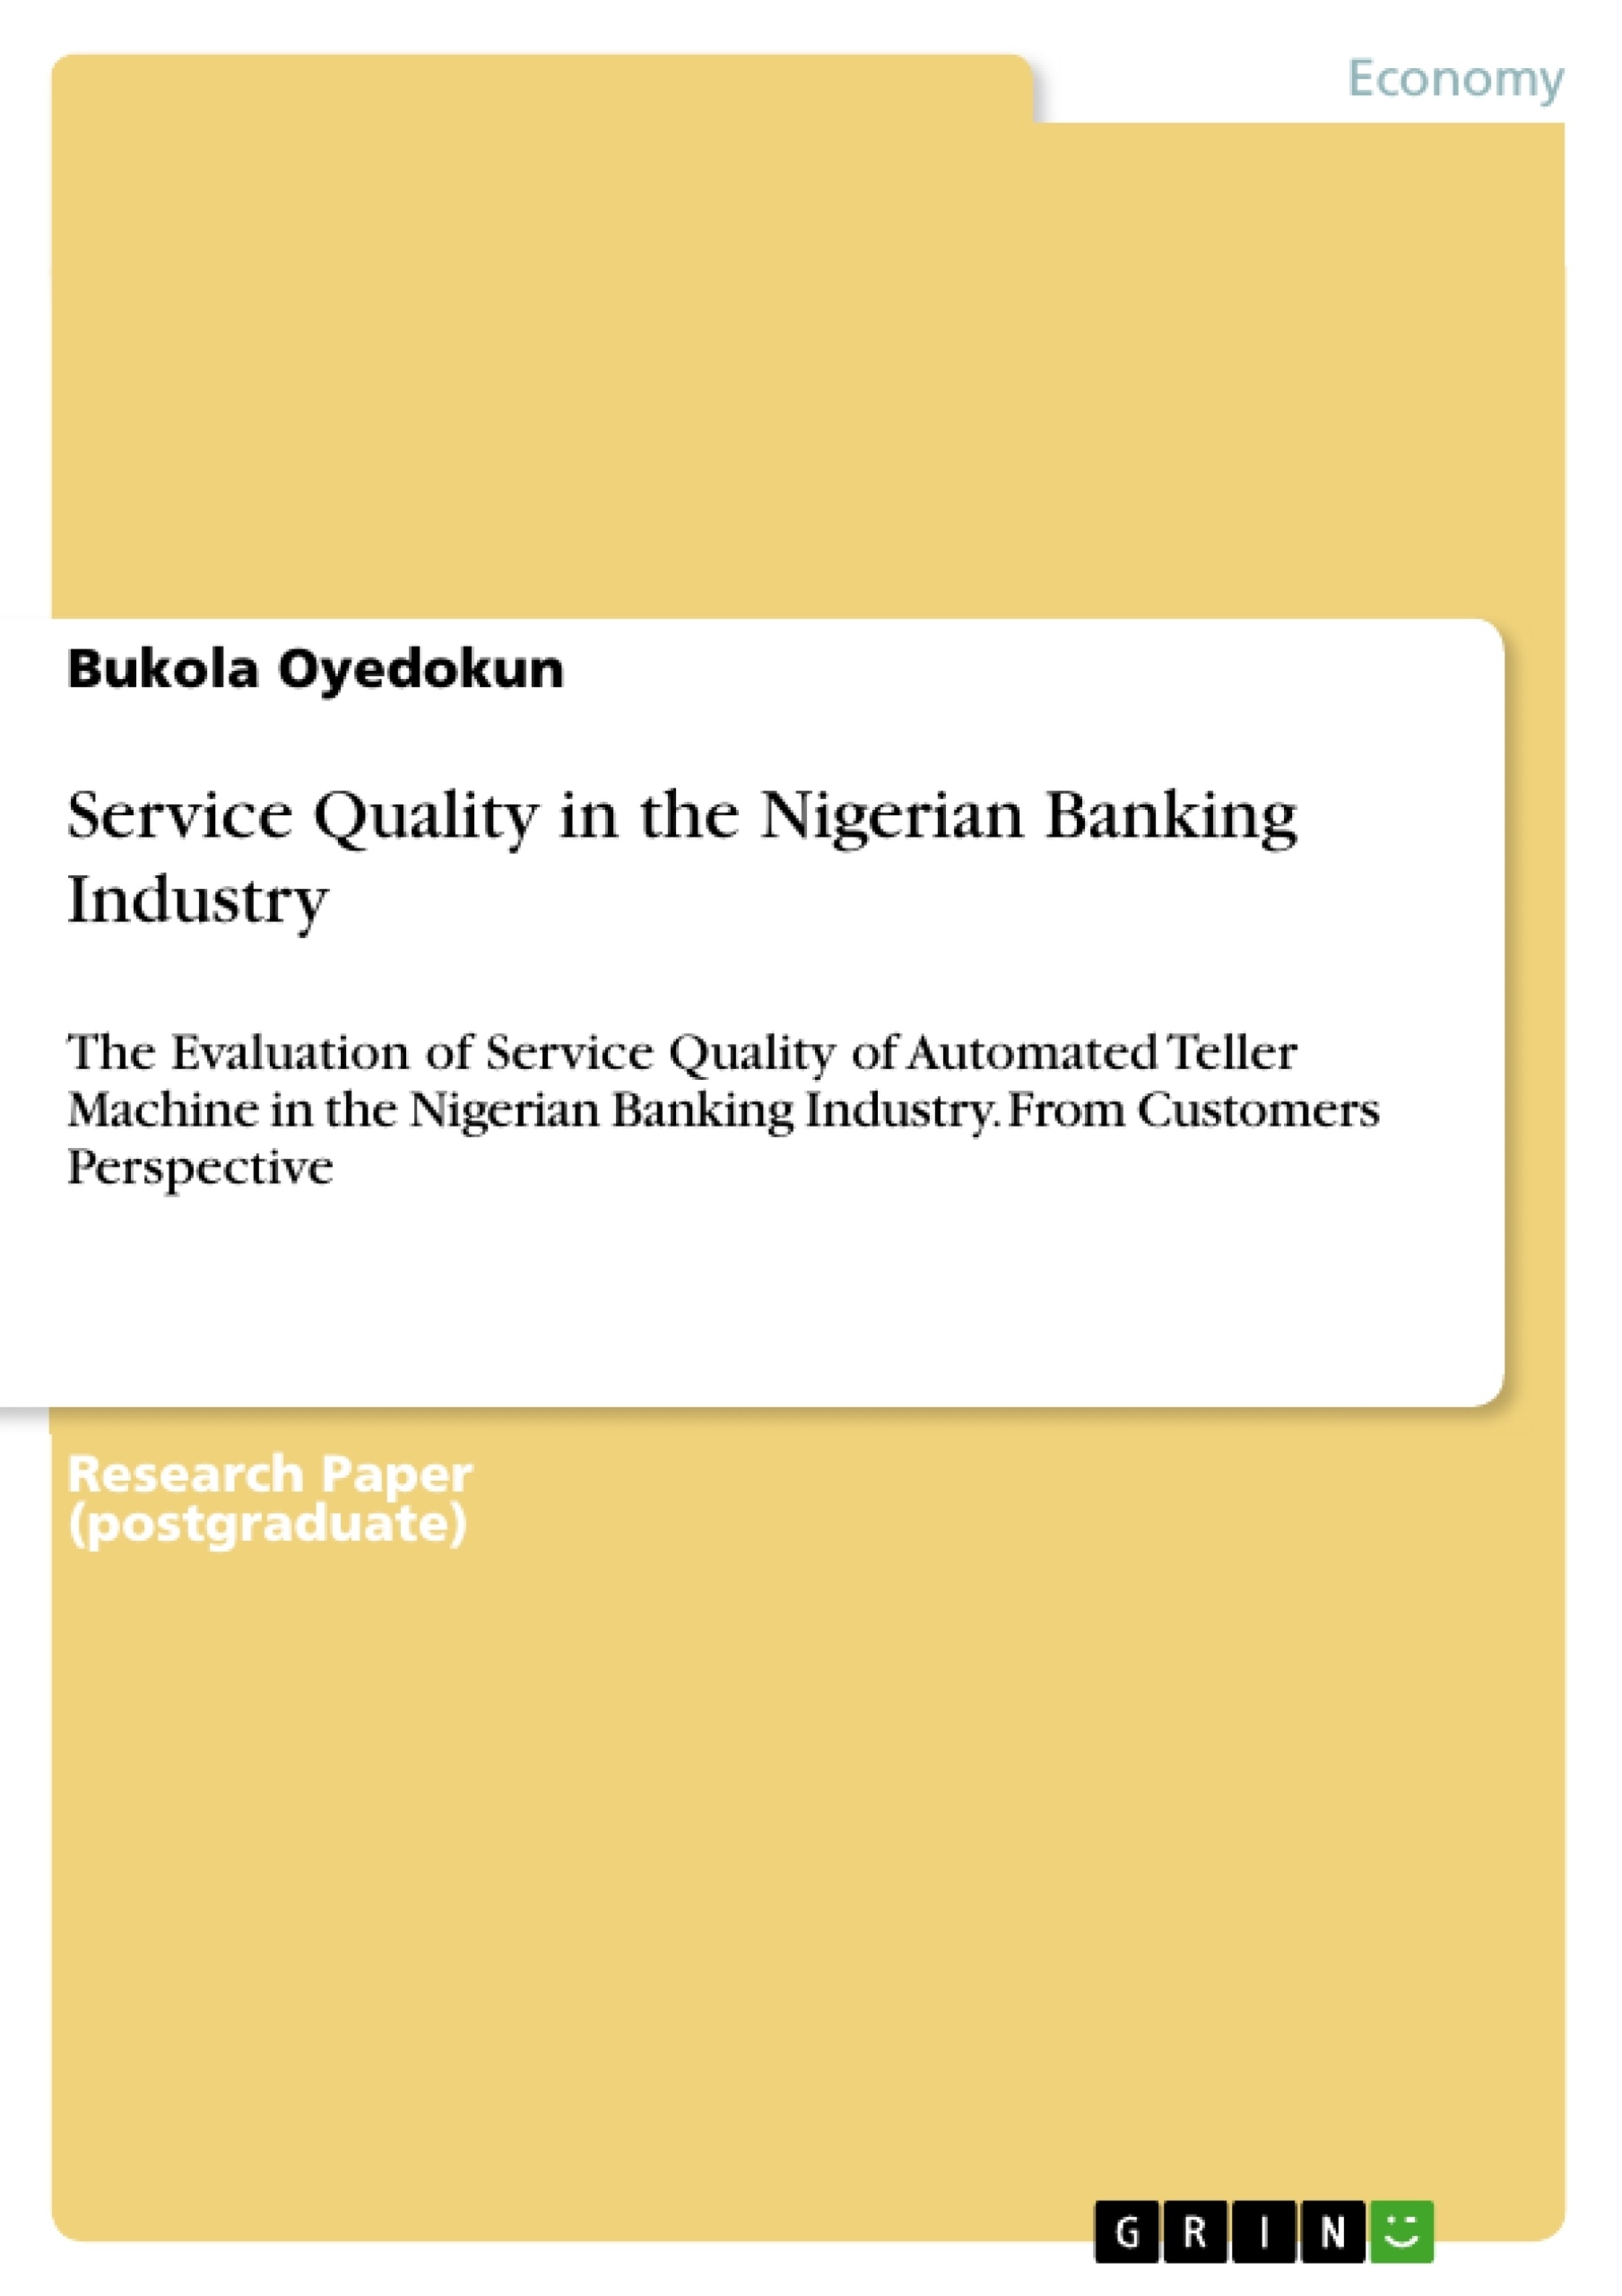 Title: Service Quality in the Nigerian Banking Industry